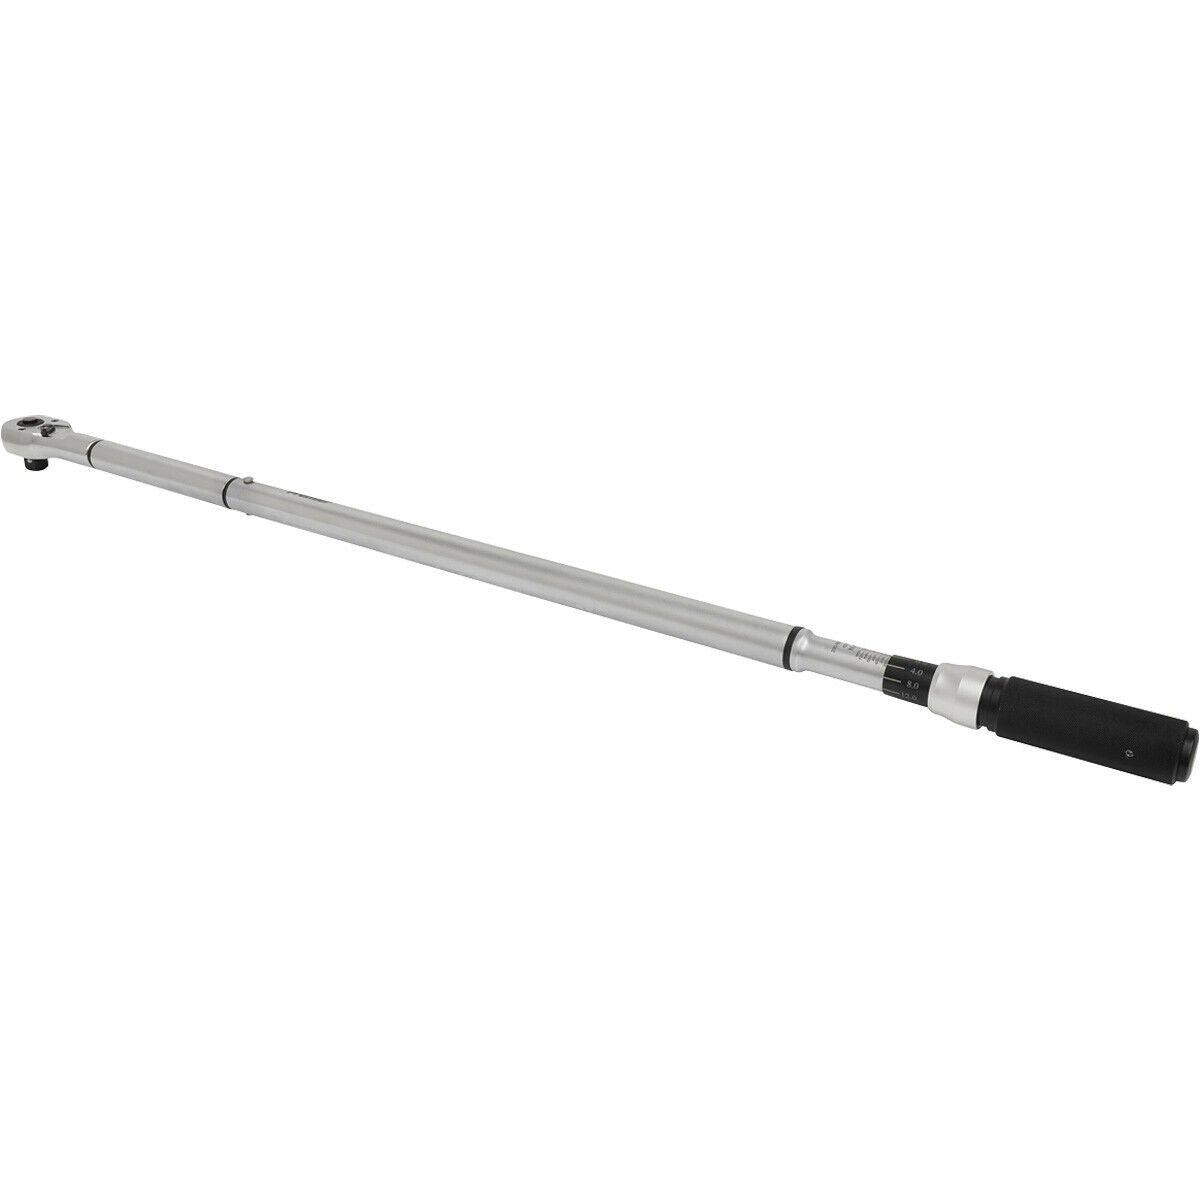 Micrometer Style Torque Wrench - 3/4